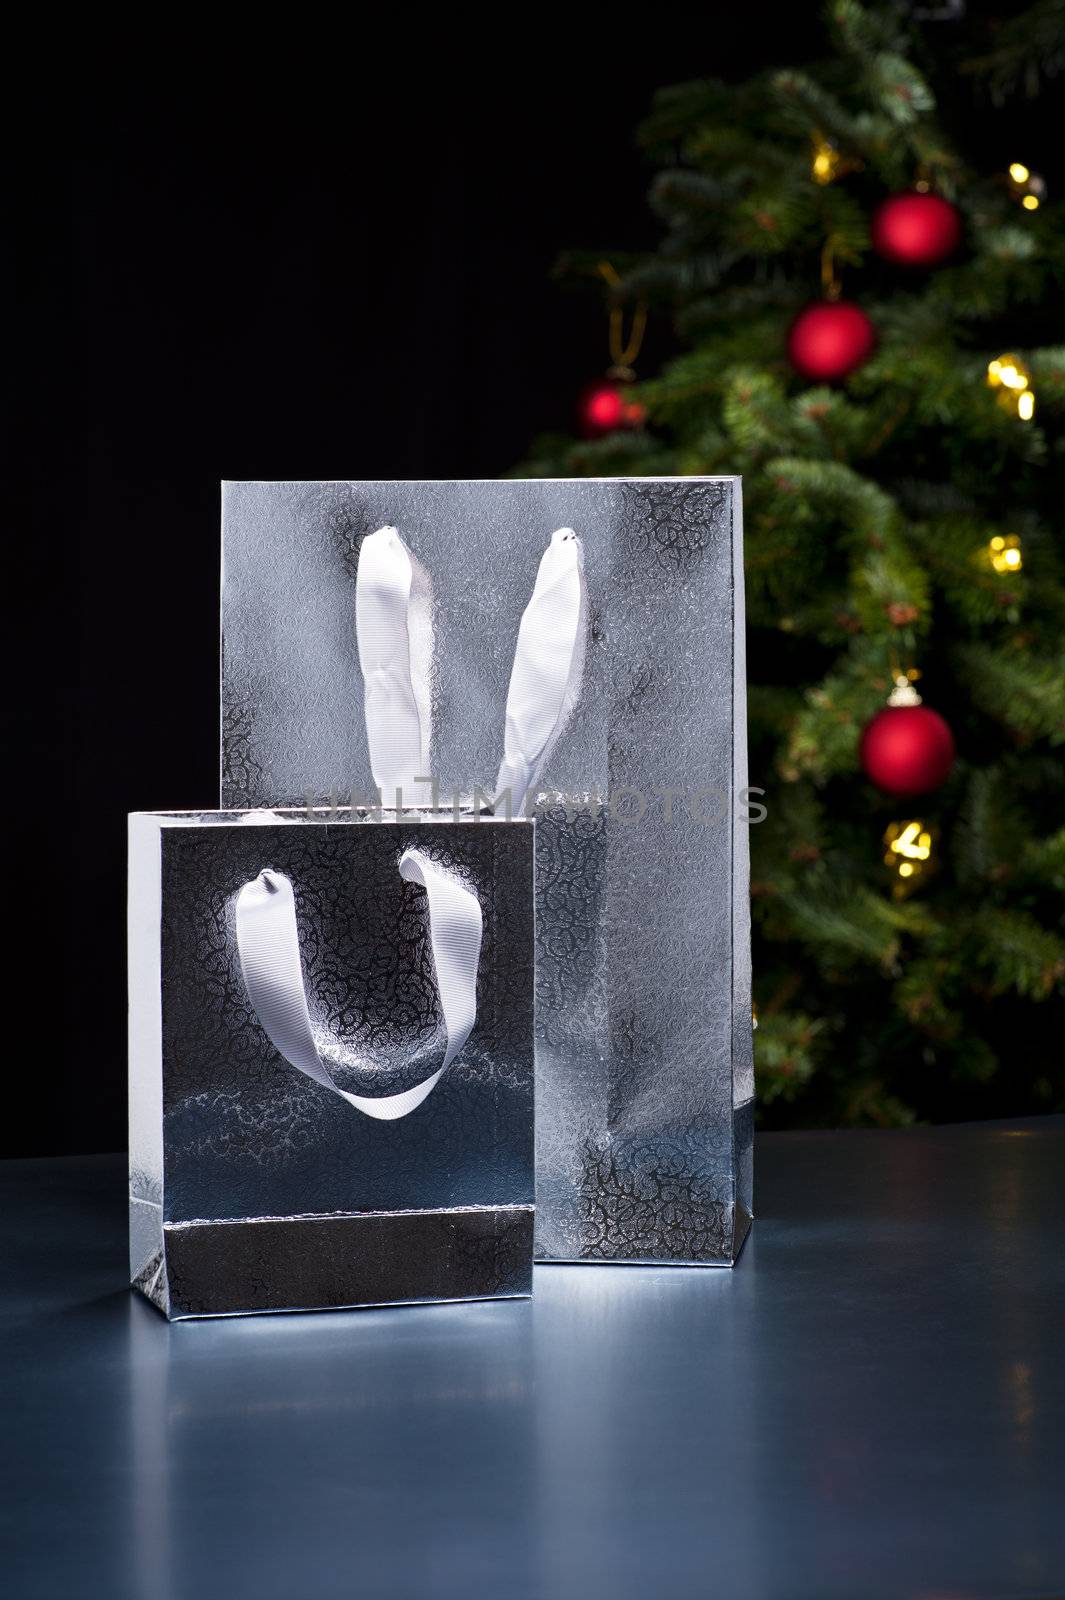 Two silver shopping bags in an elegant Christmas setting